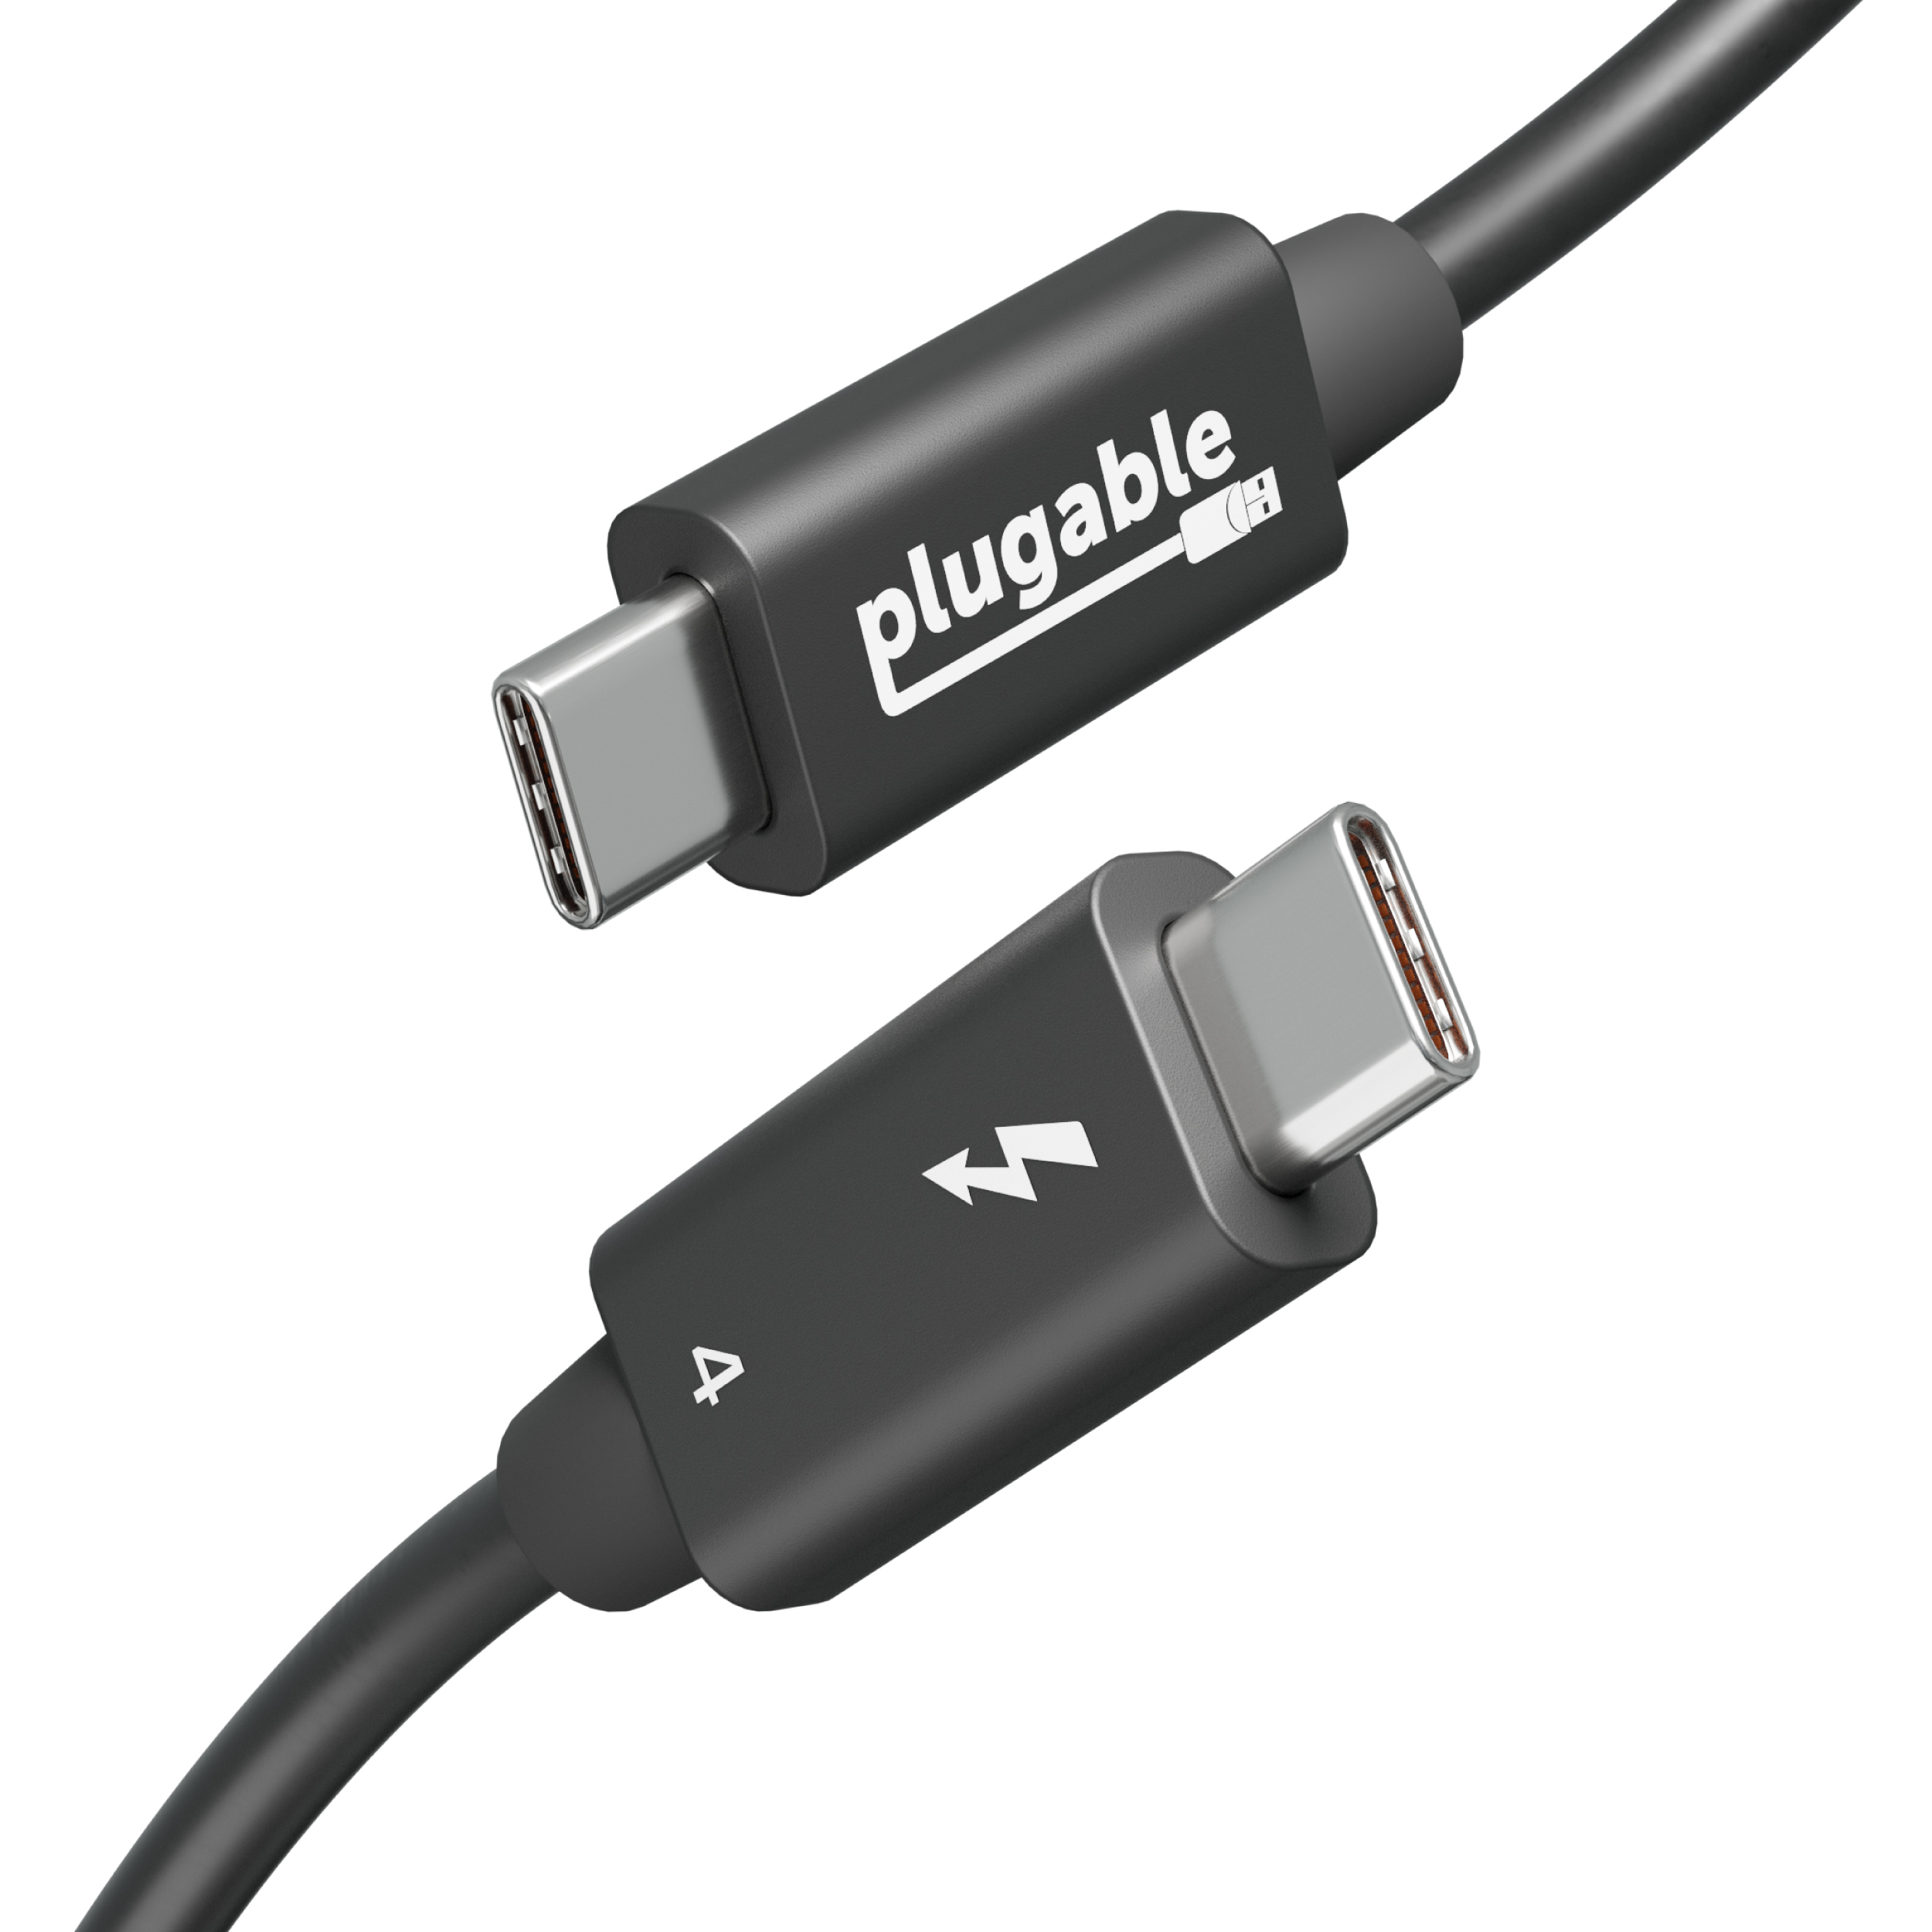 Plugable Thunderbolt 4 Cable with 240W Charging, Thunderbolt Certified, 3.3 Feet (1M),1x 8K Display, 40 Gbps, Compatible with USB4, Thunderbolt 3, USB-C - image 1 of 7